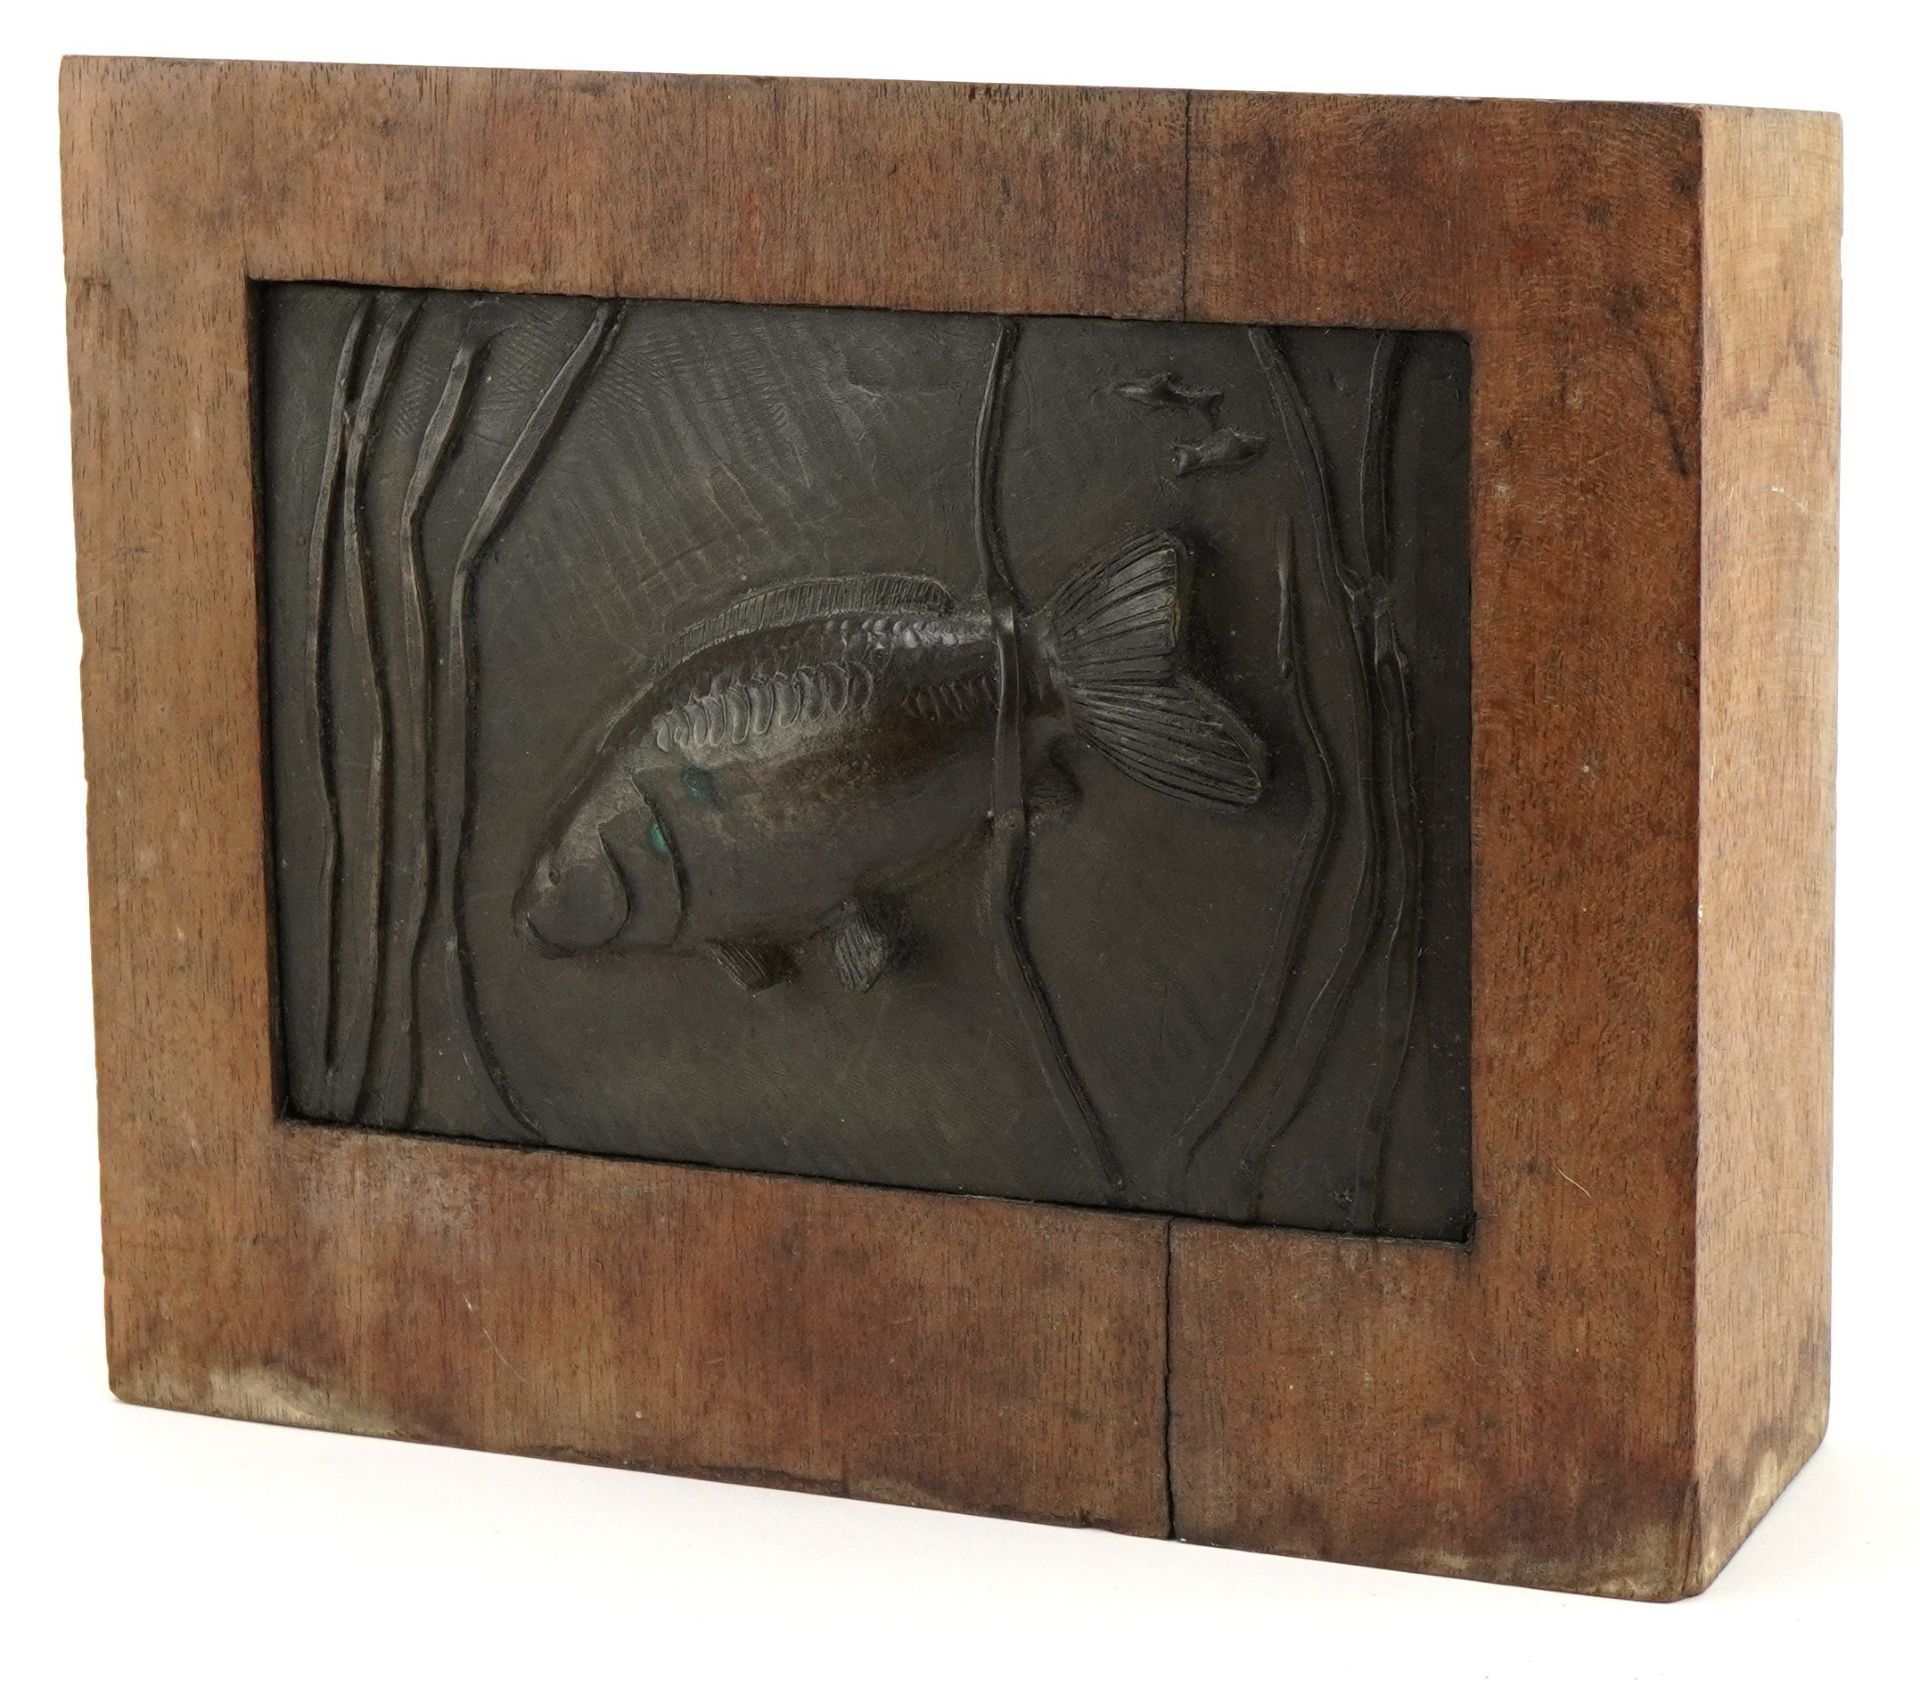 Mid century style wooden block inset with a bronzed plaque of a fish amongst aquatic life, 22cm H